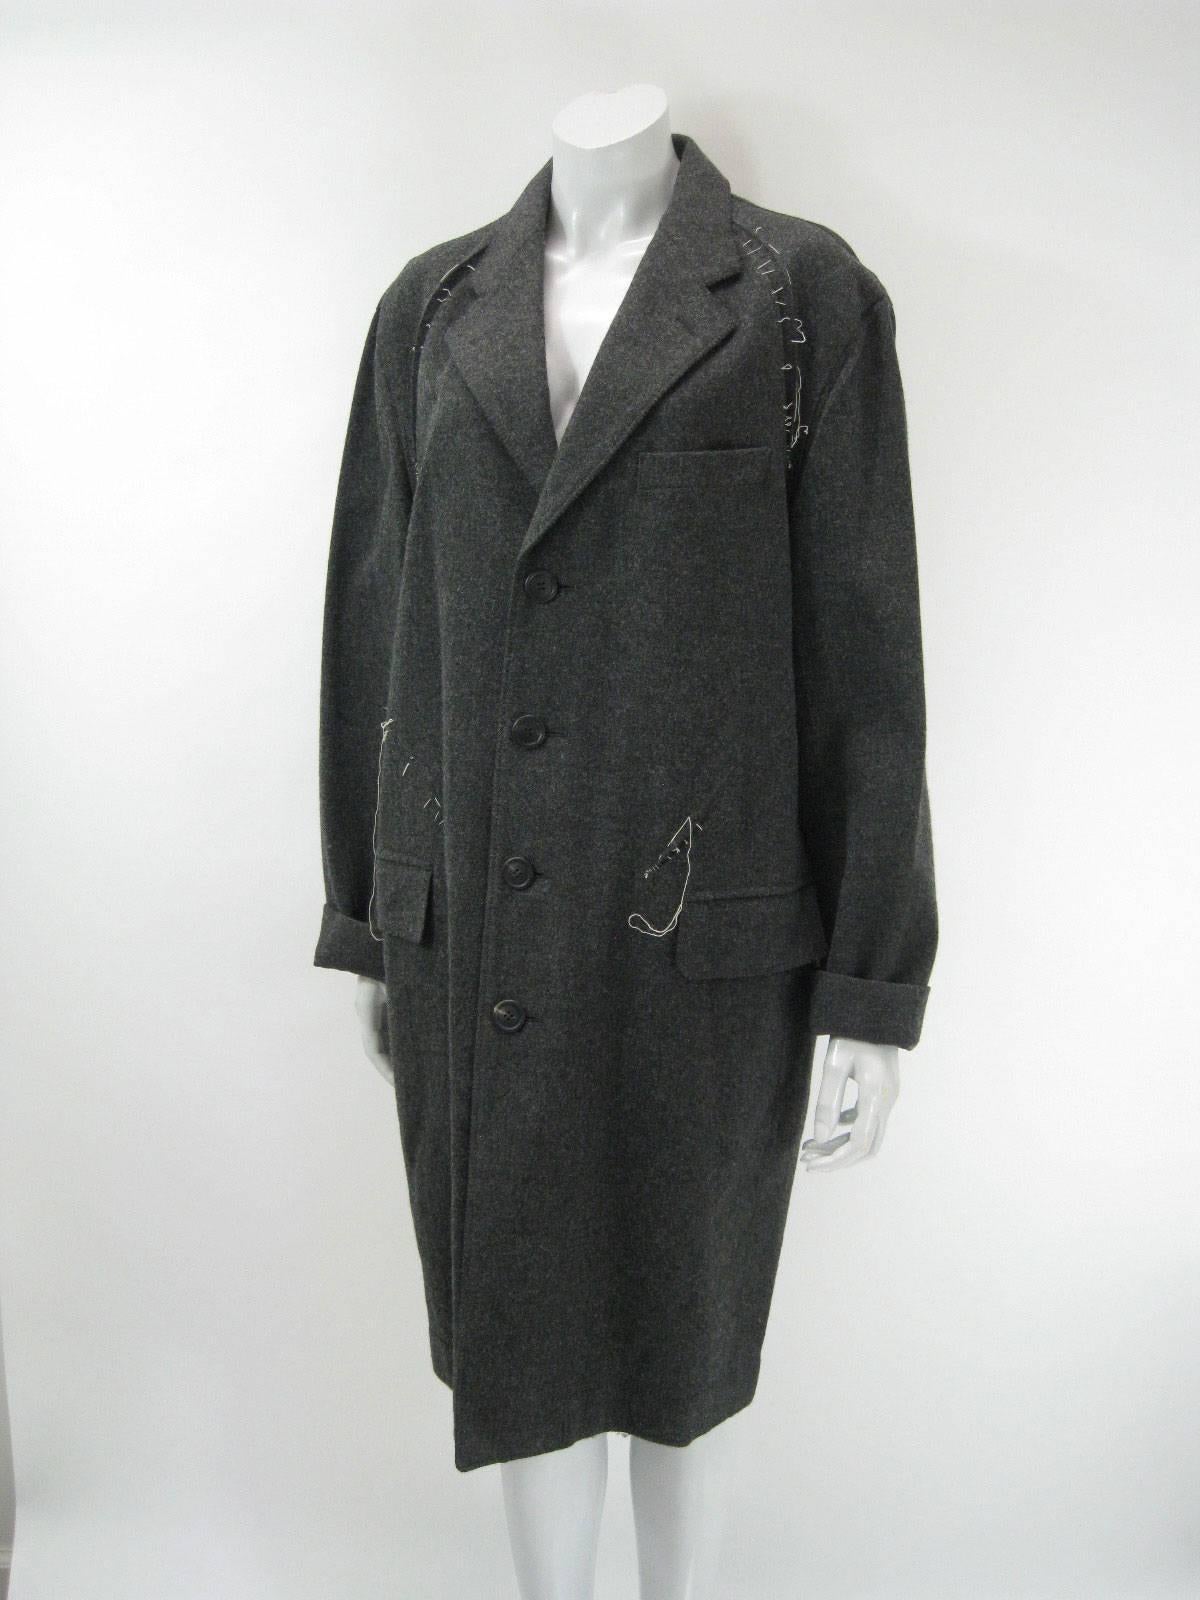 Avant Garde Issey Miyake Men wool coat.

Grey with white threaded abstract stitched details.

Front patch pockets. One chest pocket.

Inverted pleat back with pleats and stitches.

Large charcoal grey buttons.

Unlined.

Tagged size 3.

Fabric is